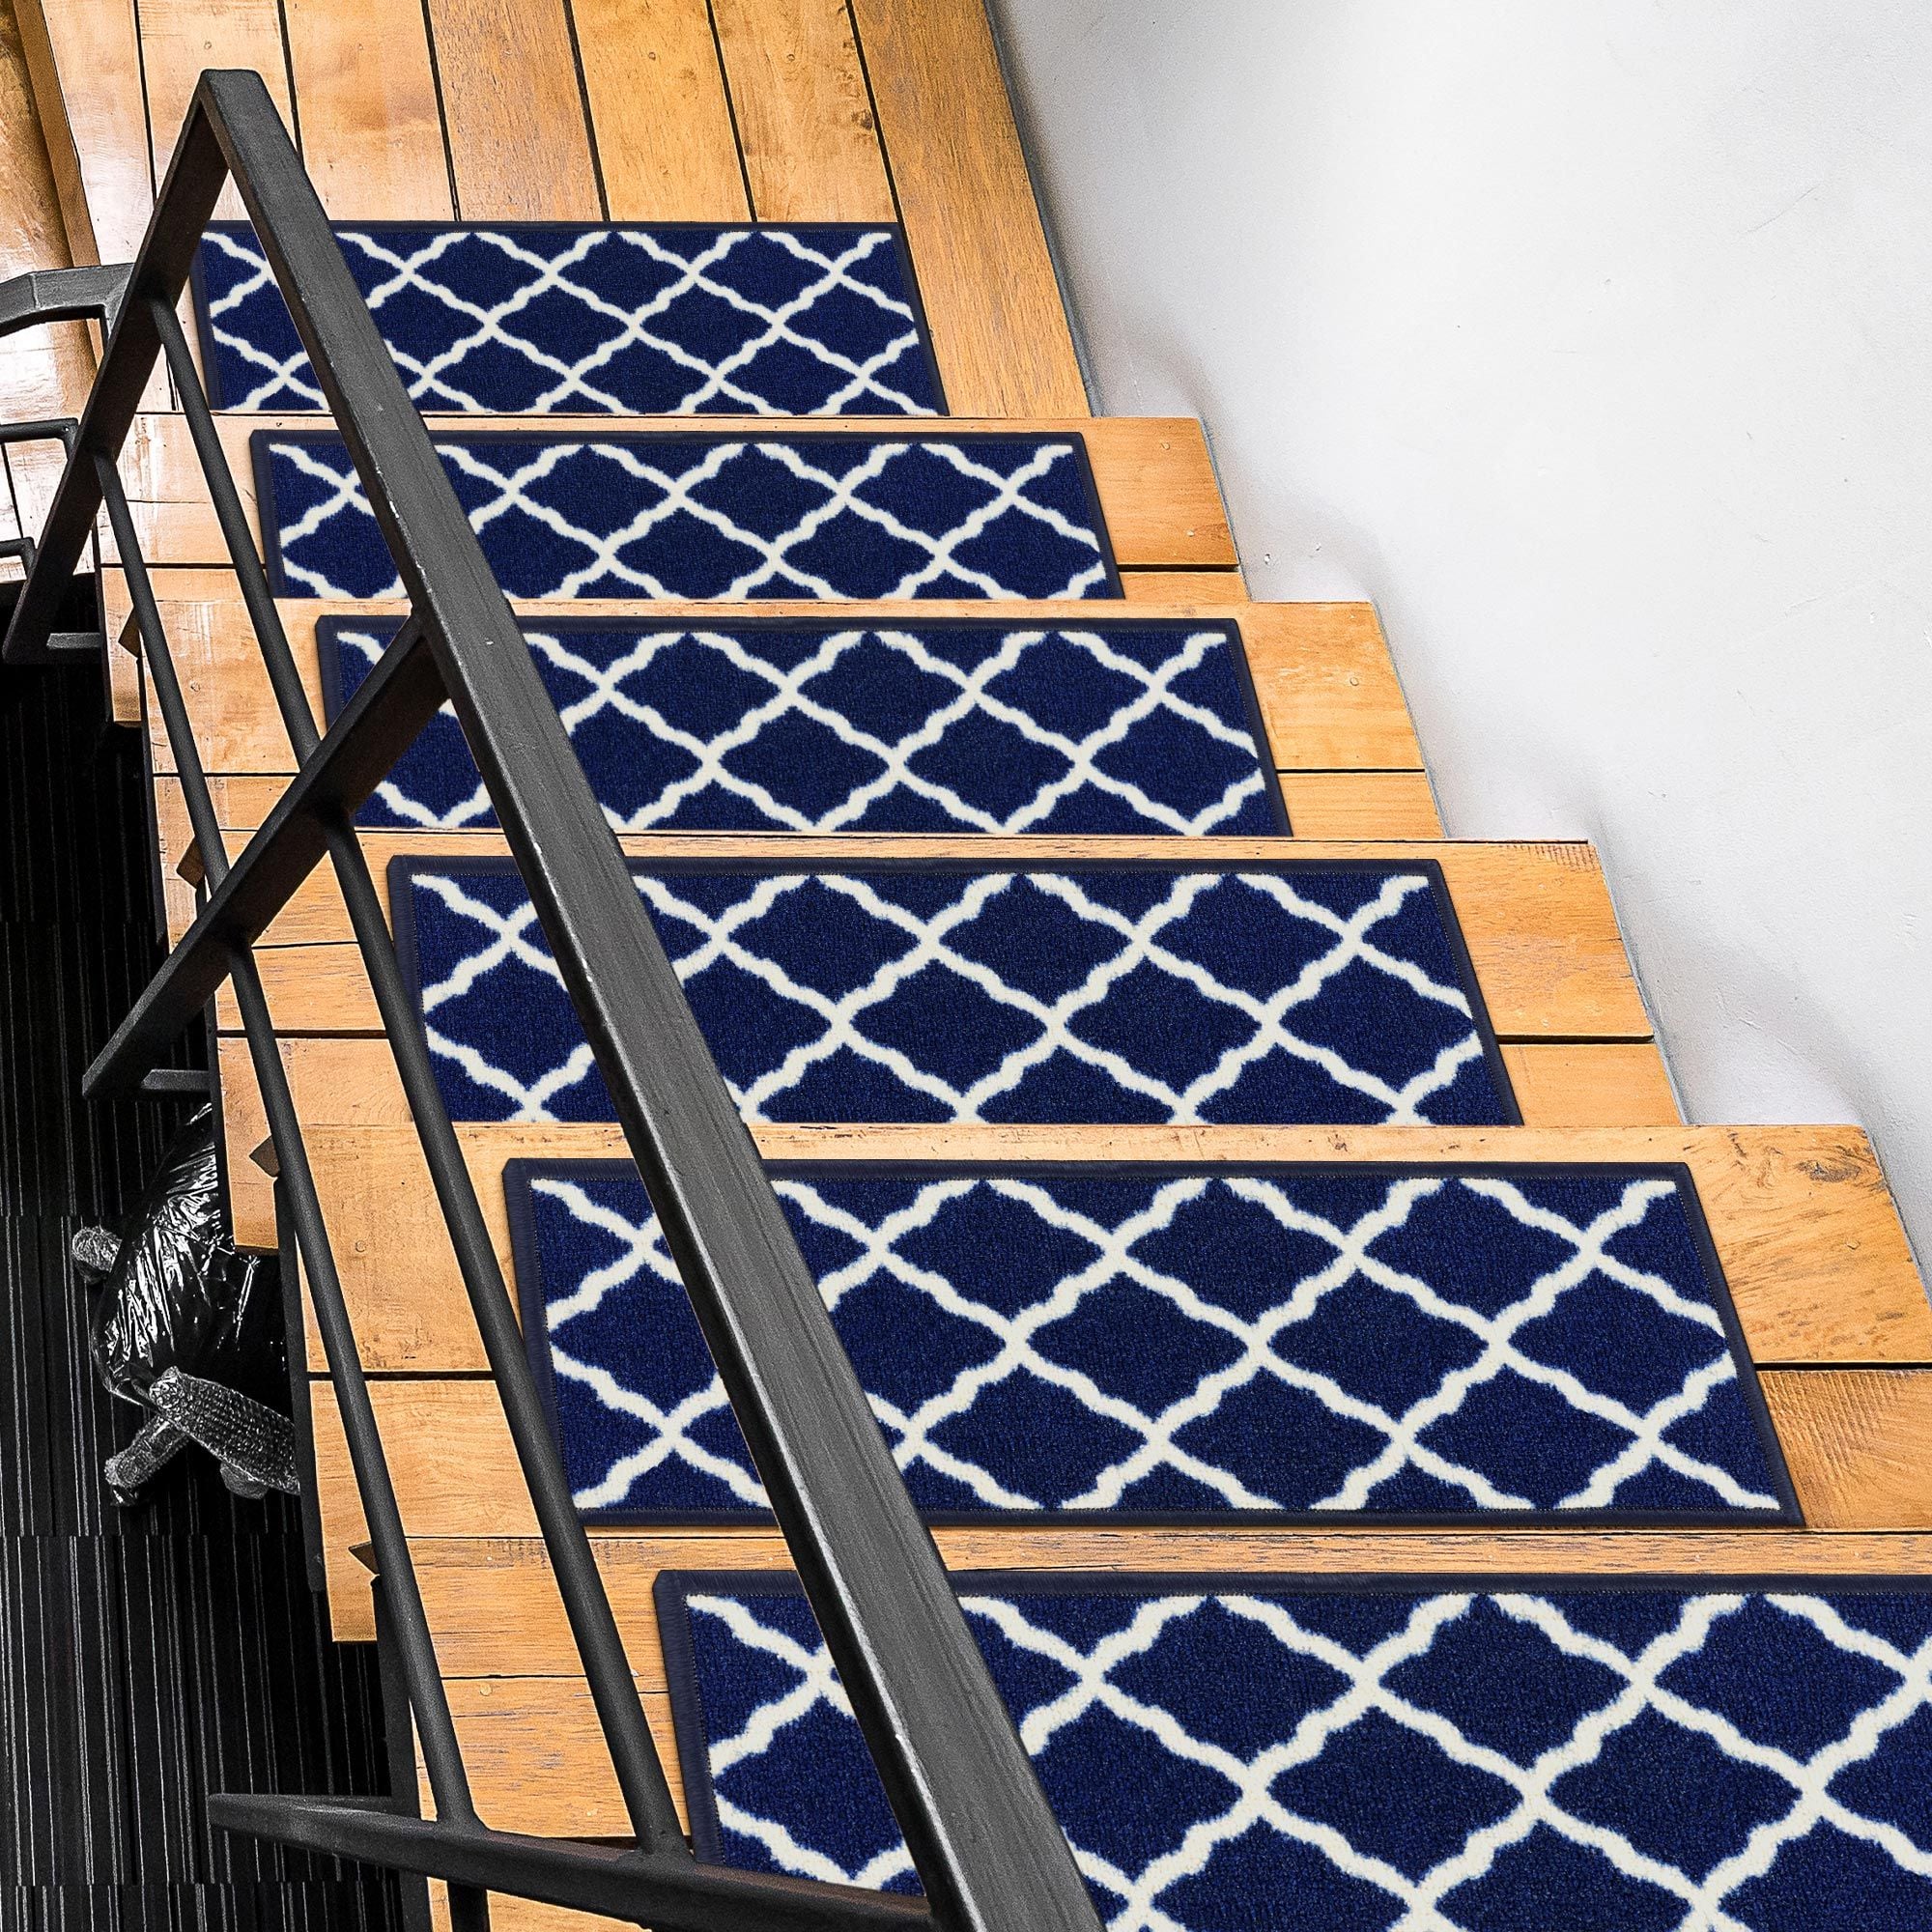 Non Slip Rubber Stair Treads, Carpet Stair Treads, Stair Runners for Wooden  Steps, Basement Stair Rug Mats for Pet, Kids and Elderly, 30X8